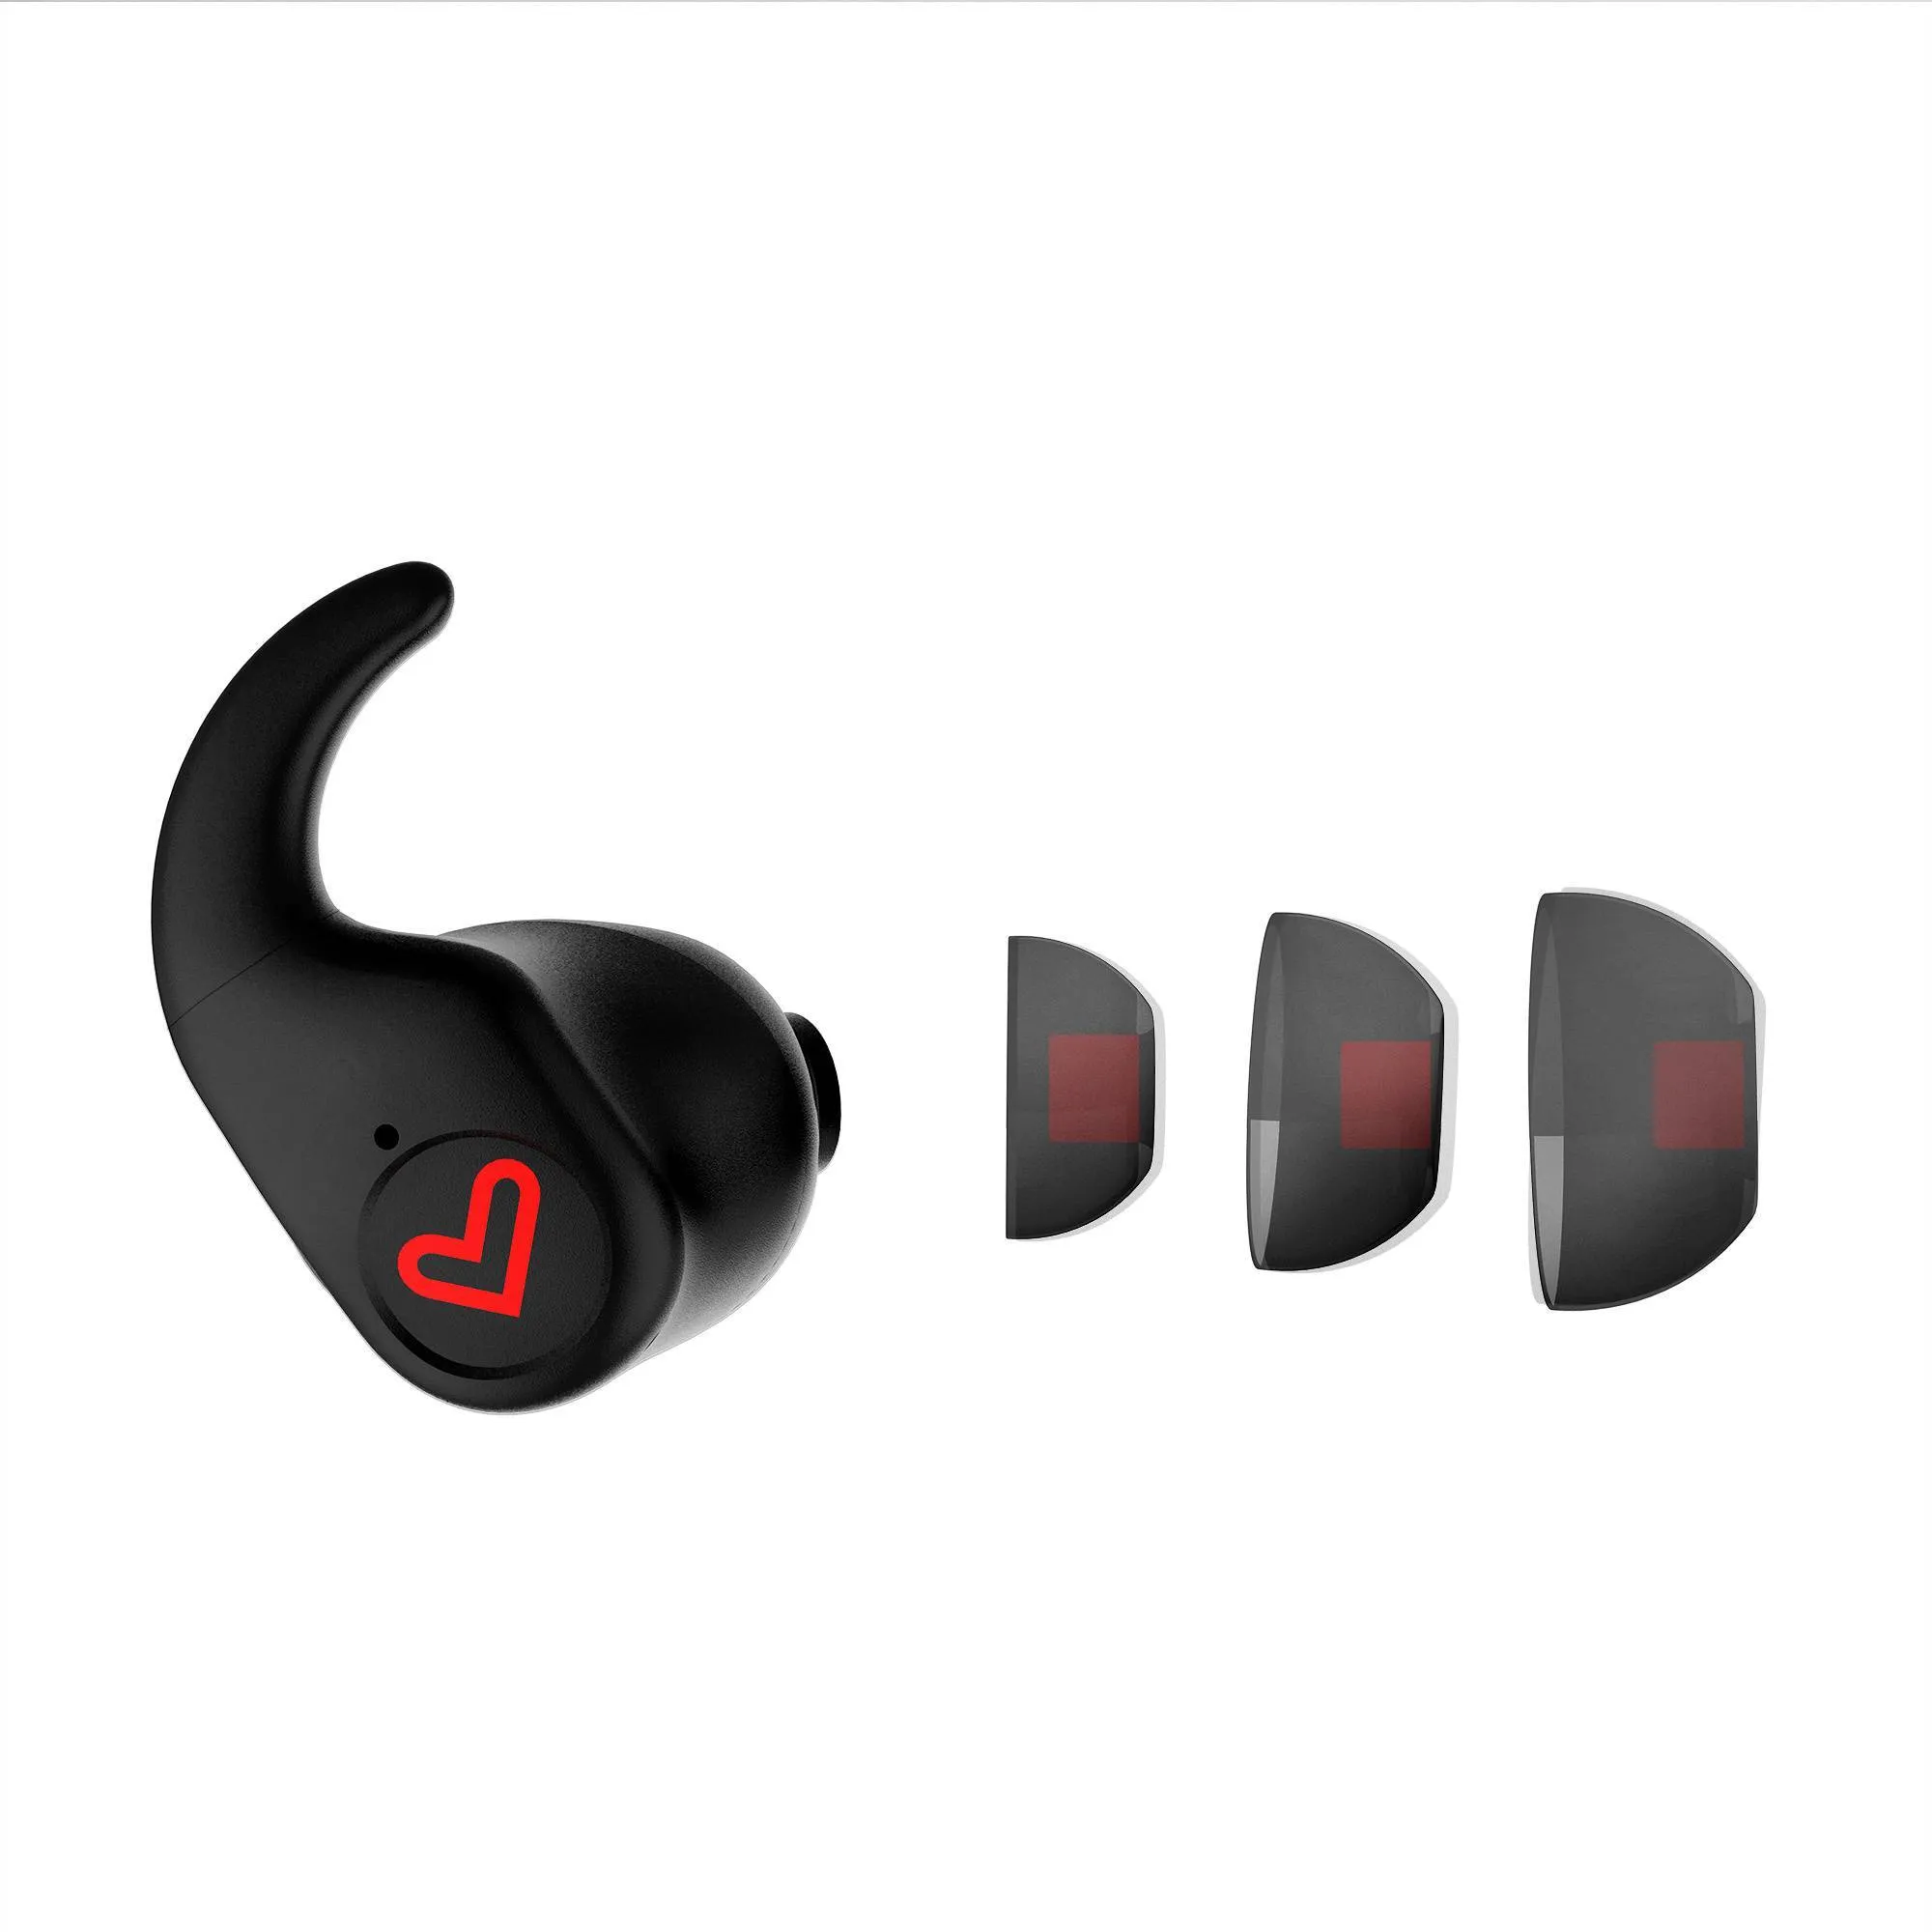 Secure-Fit+ system and ear tips in different sizes